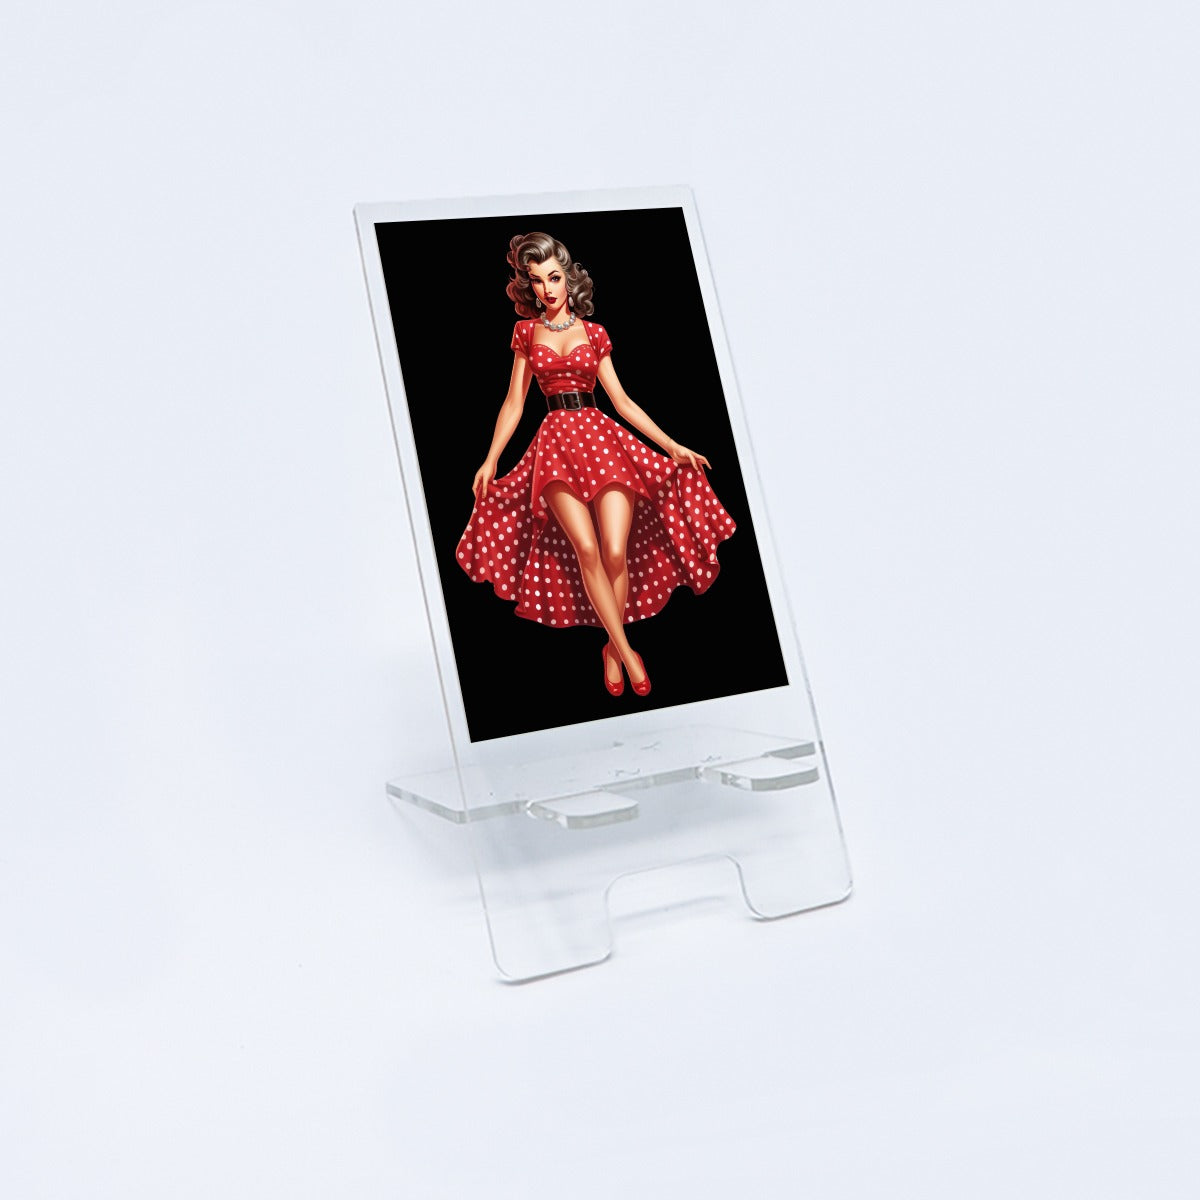 Vintage Pinup Girl - Dotted Dress - Phone holder - Acrylic